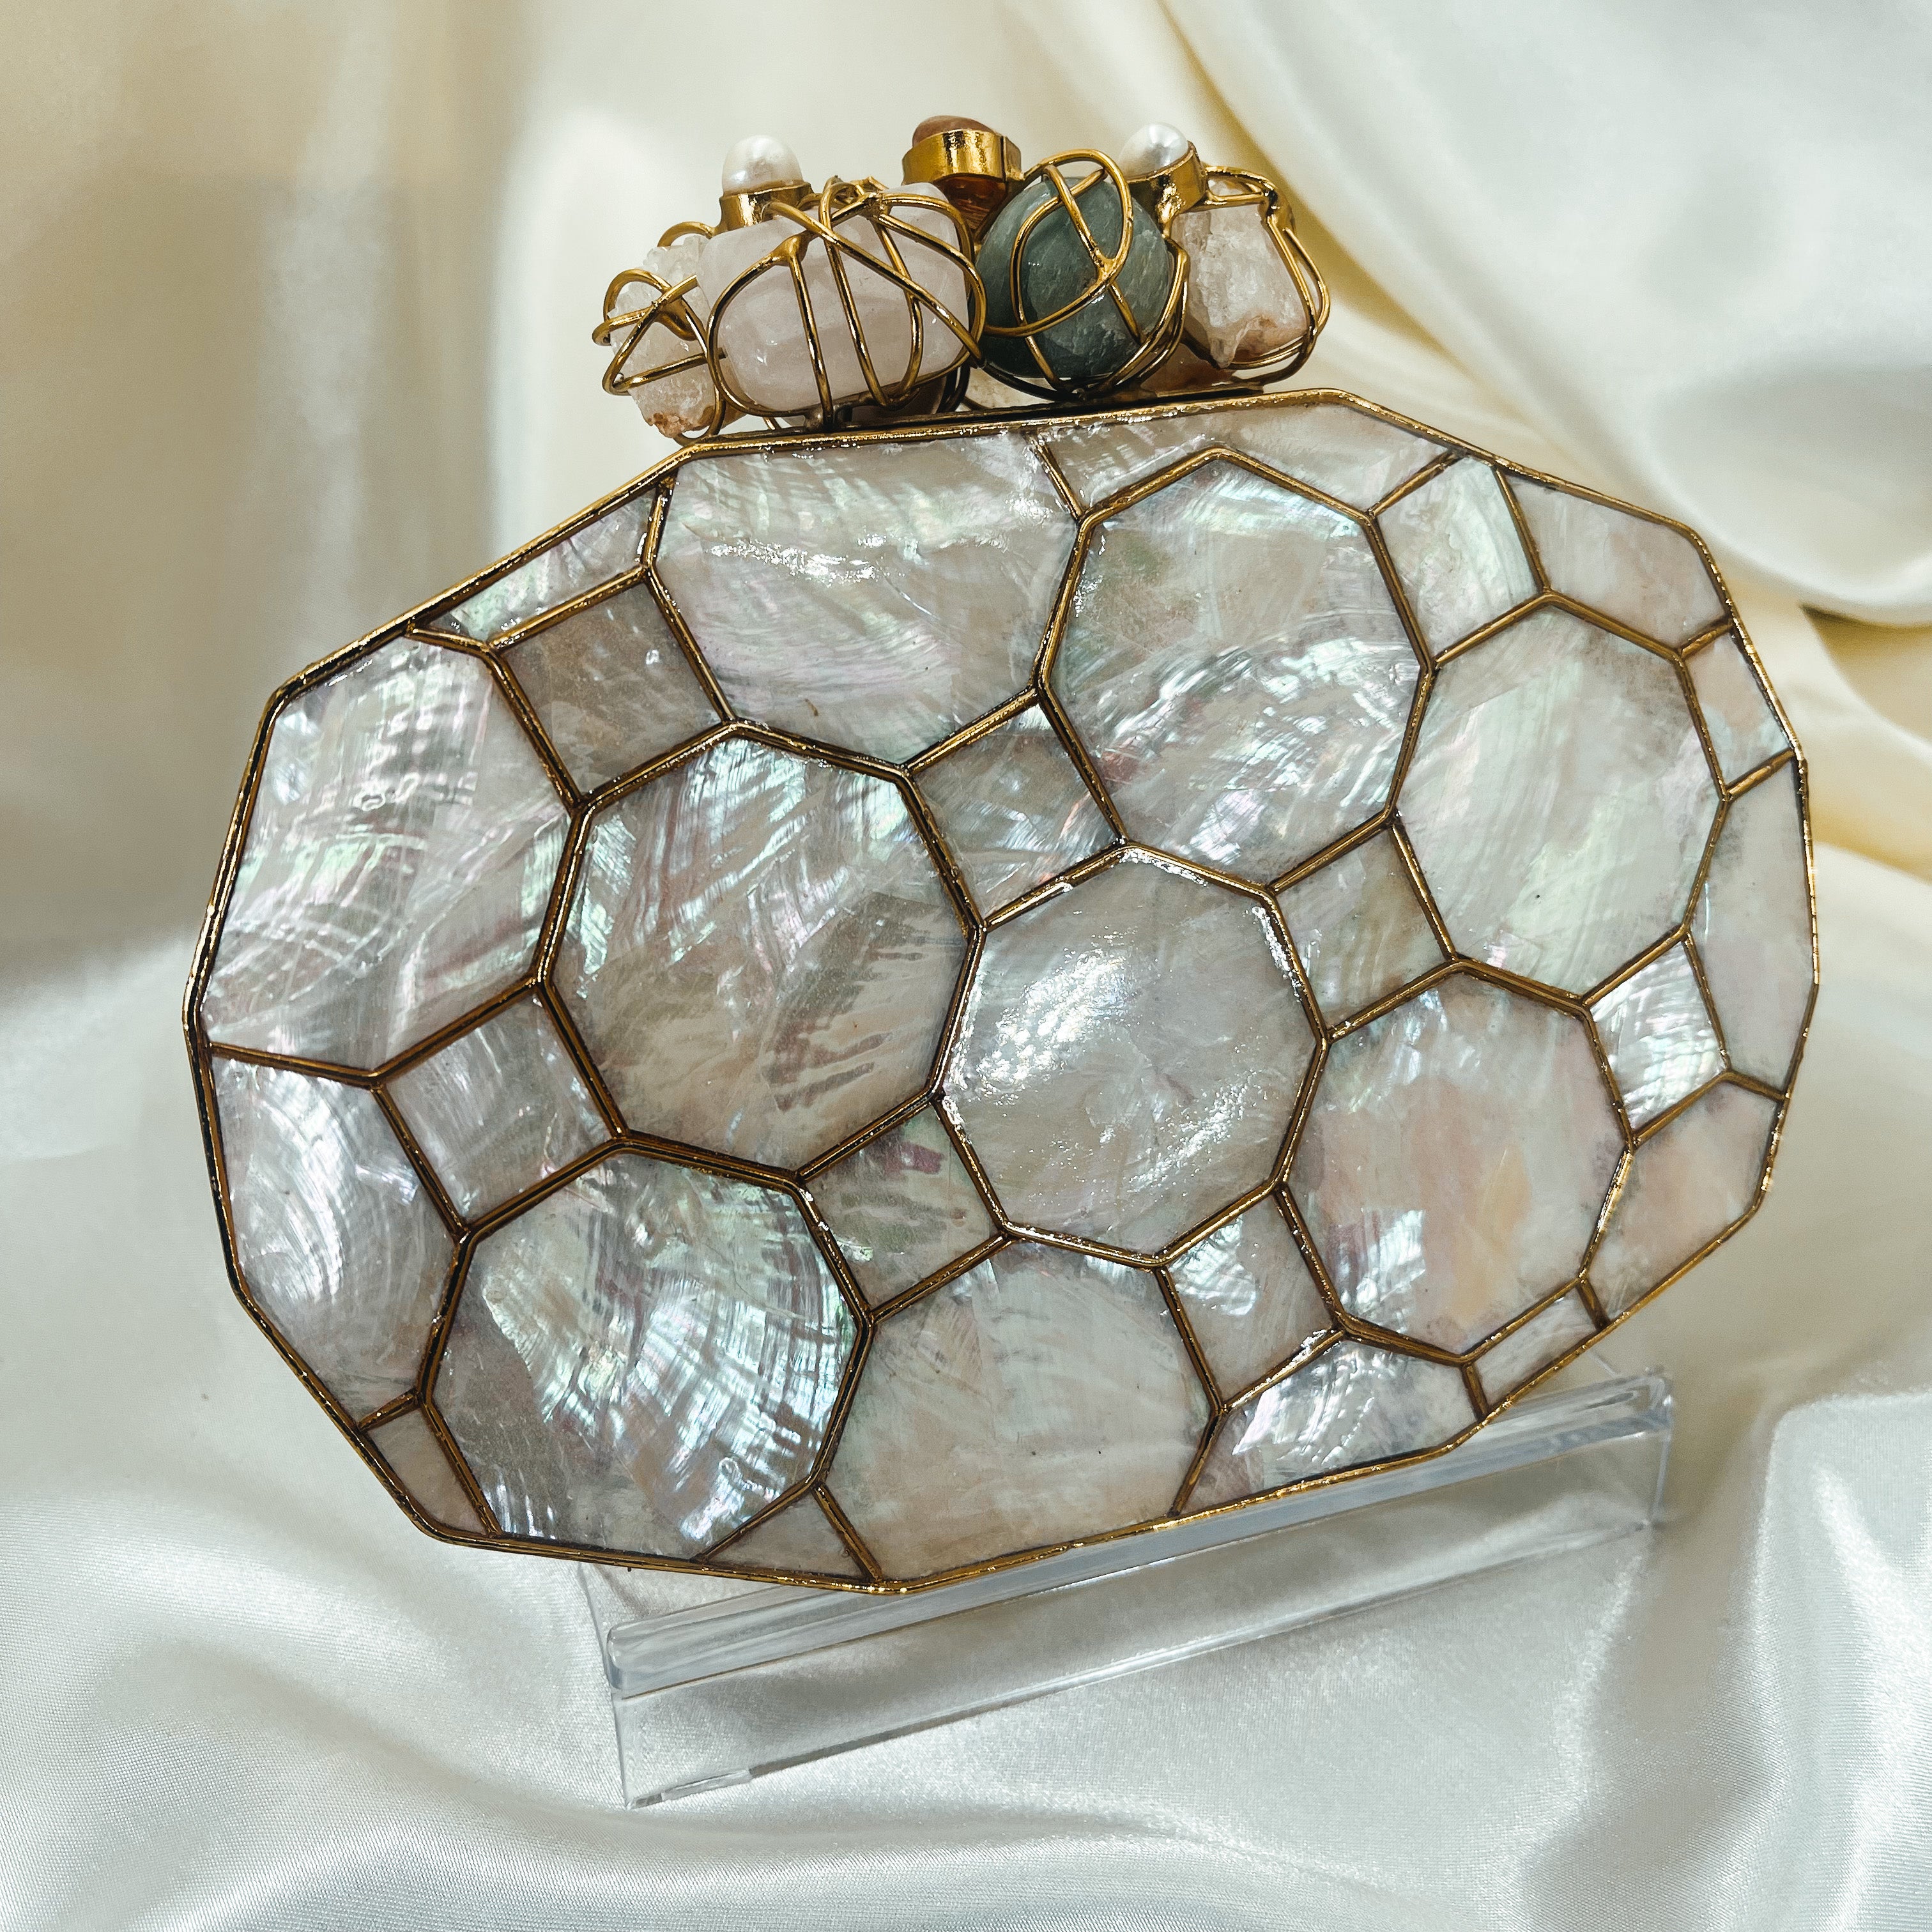 marjorie renner | Bags | Marjorie Renner Mother Of Pearl Clutch Butterfly  Jeweled Purse | Poshmark